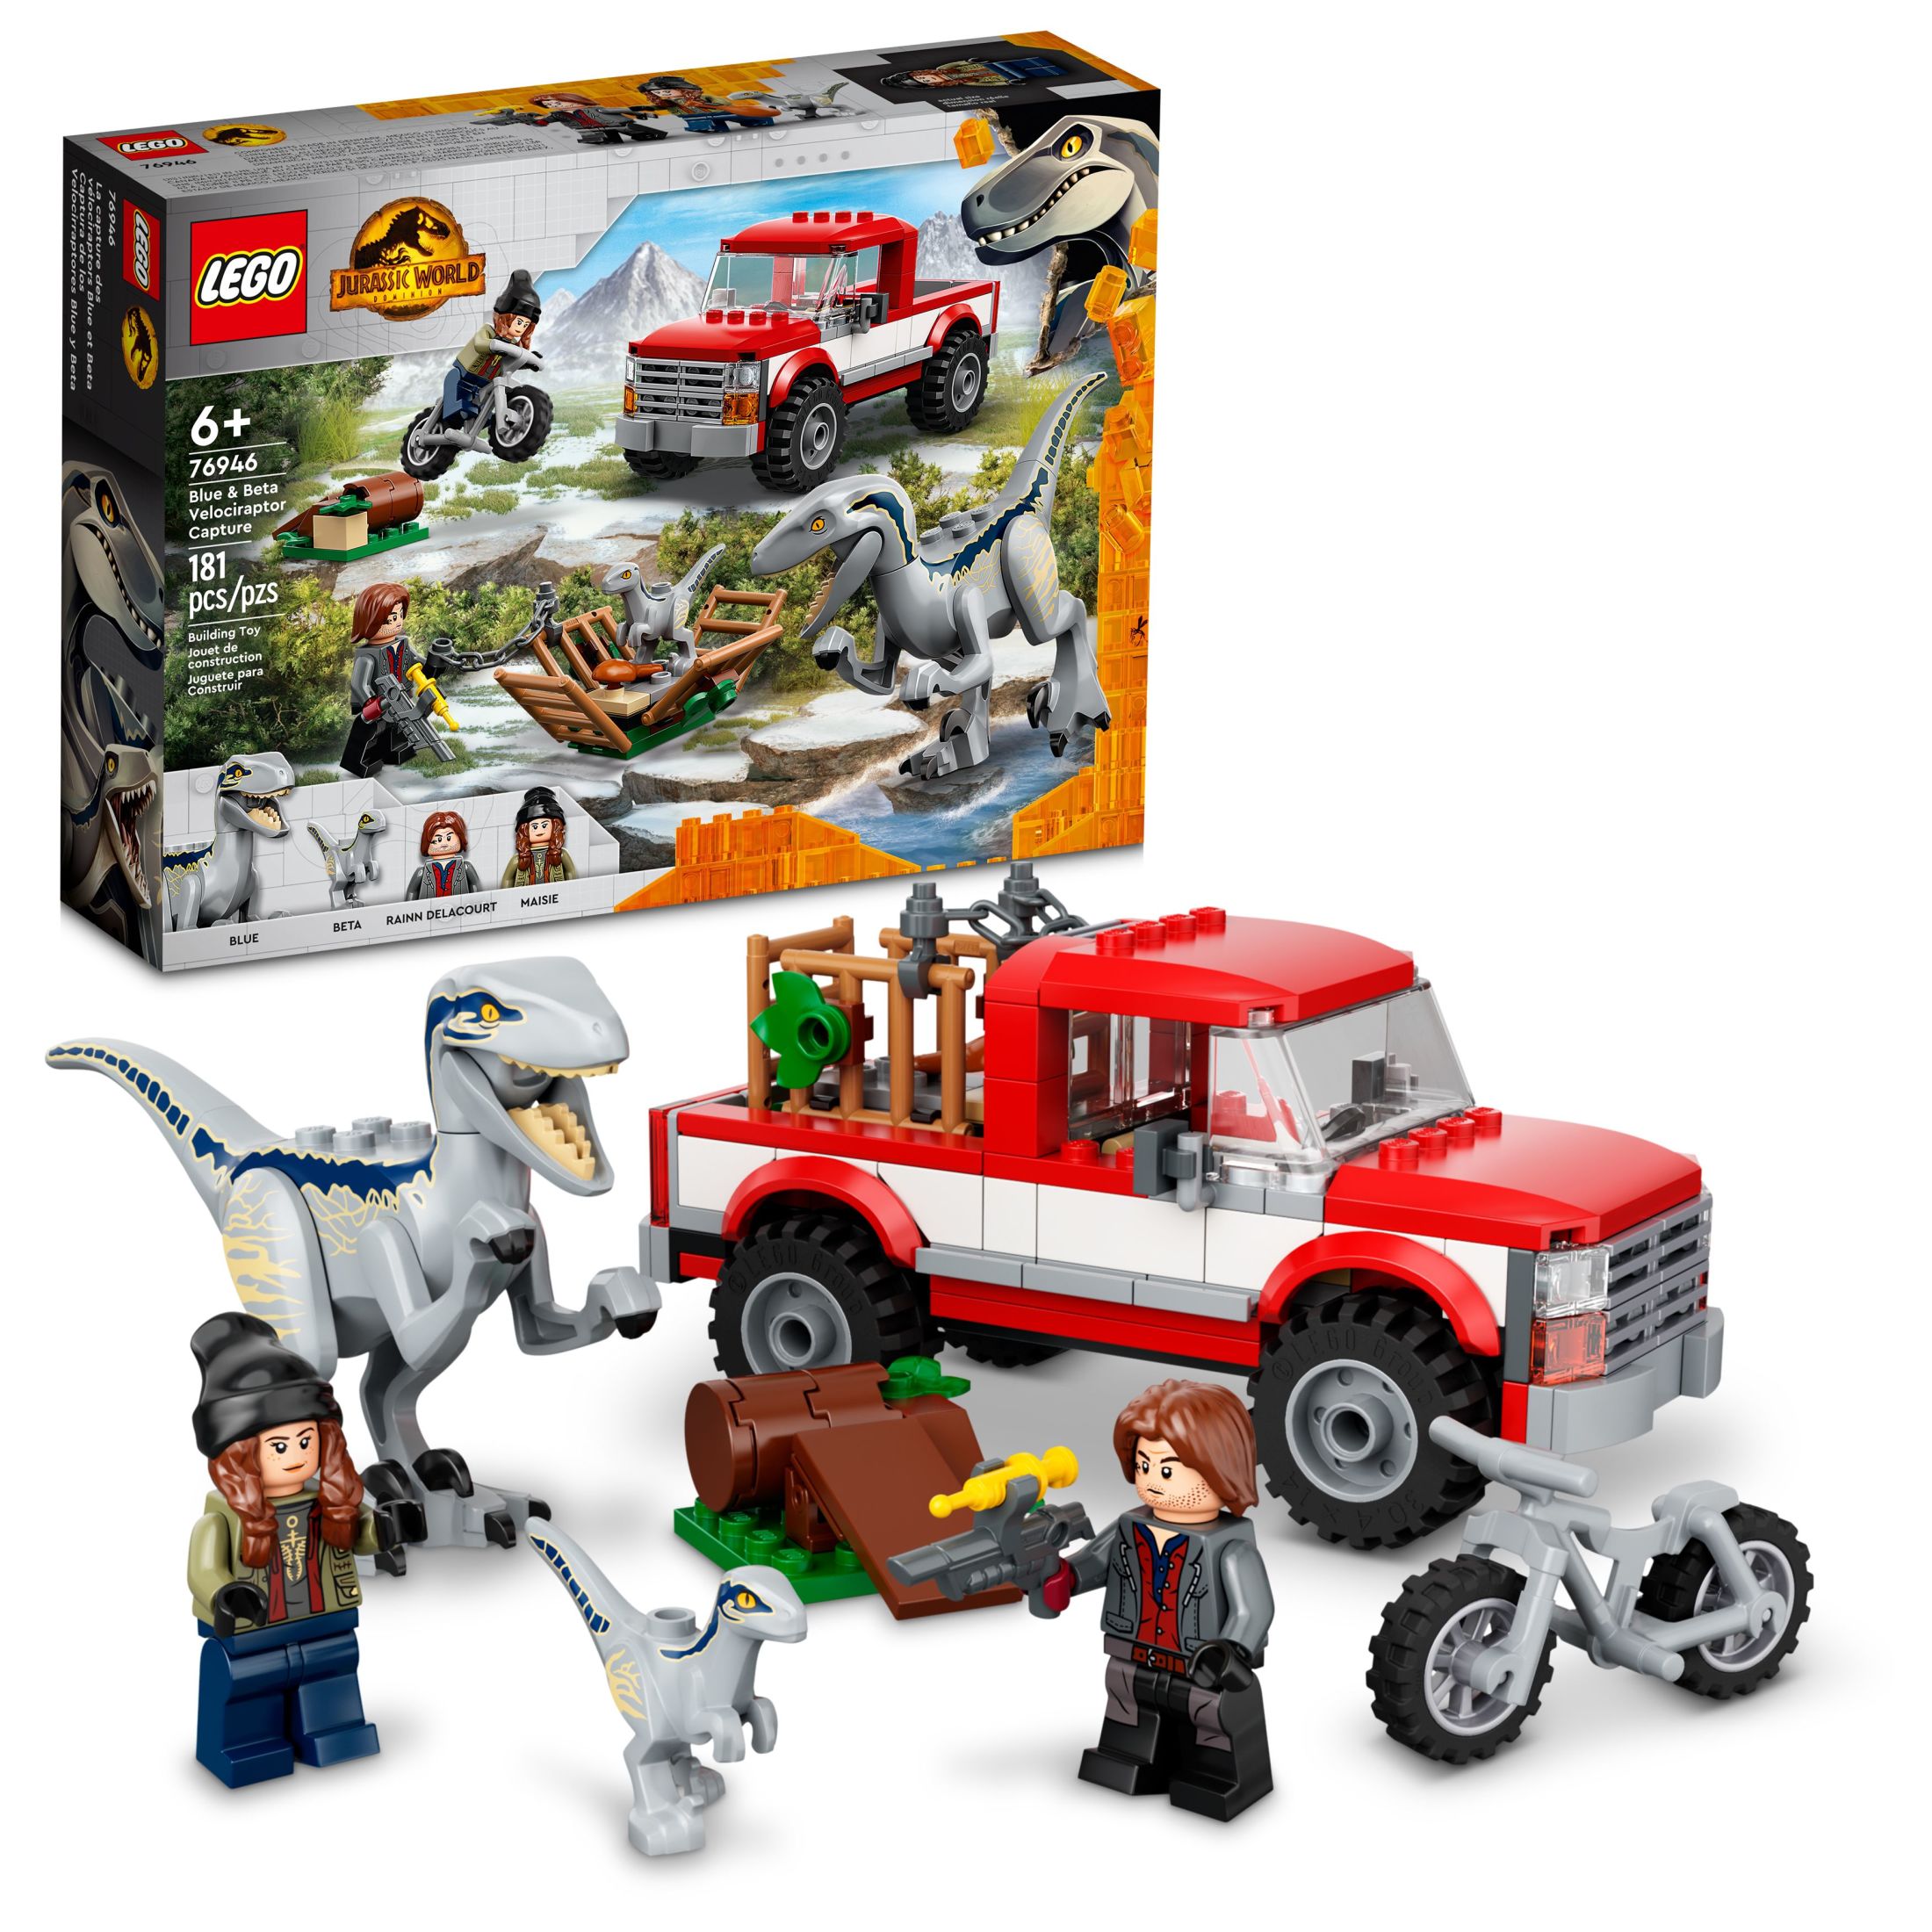 LEGO Jurassic World Blue and Beta Velociraptor Capture 76946 with Truck and 2 Dinosaur Toys for Kids, 2022 Dominion Movie Inspired Set - image 1 of 8